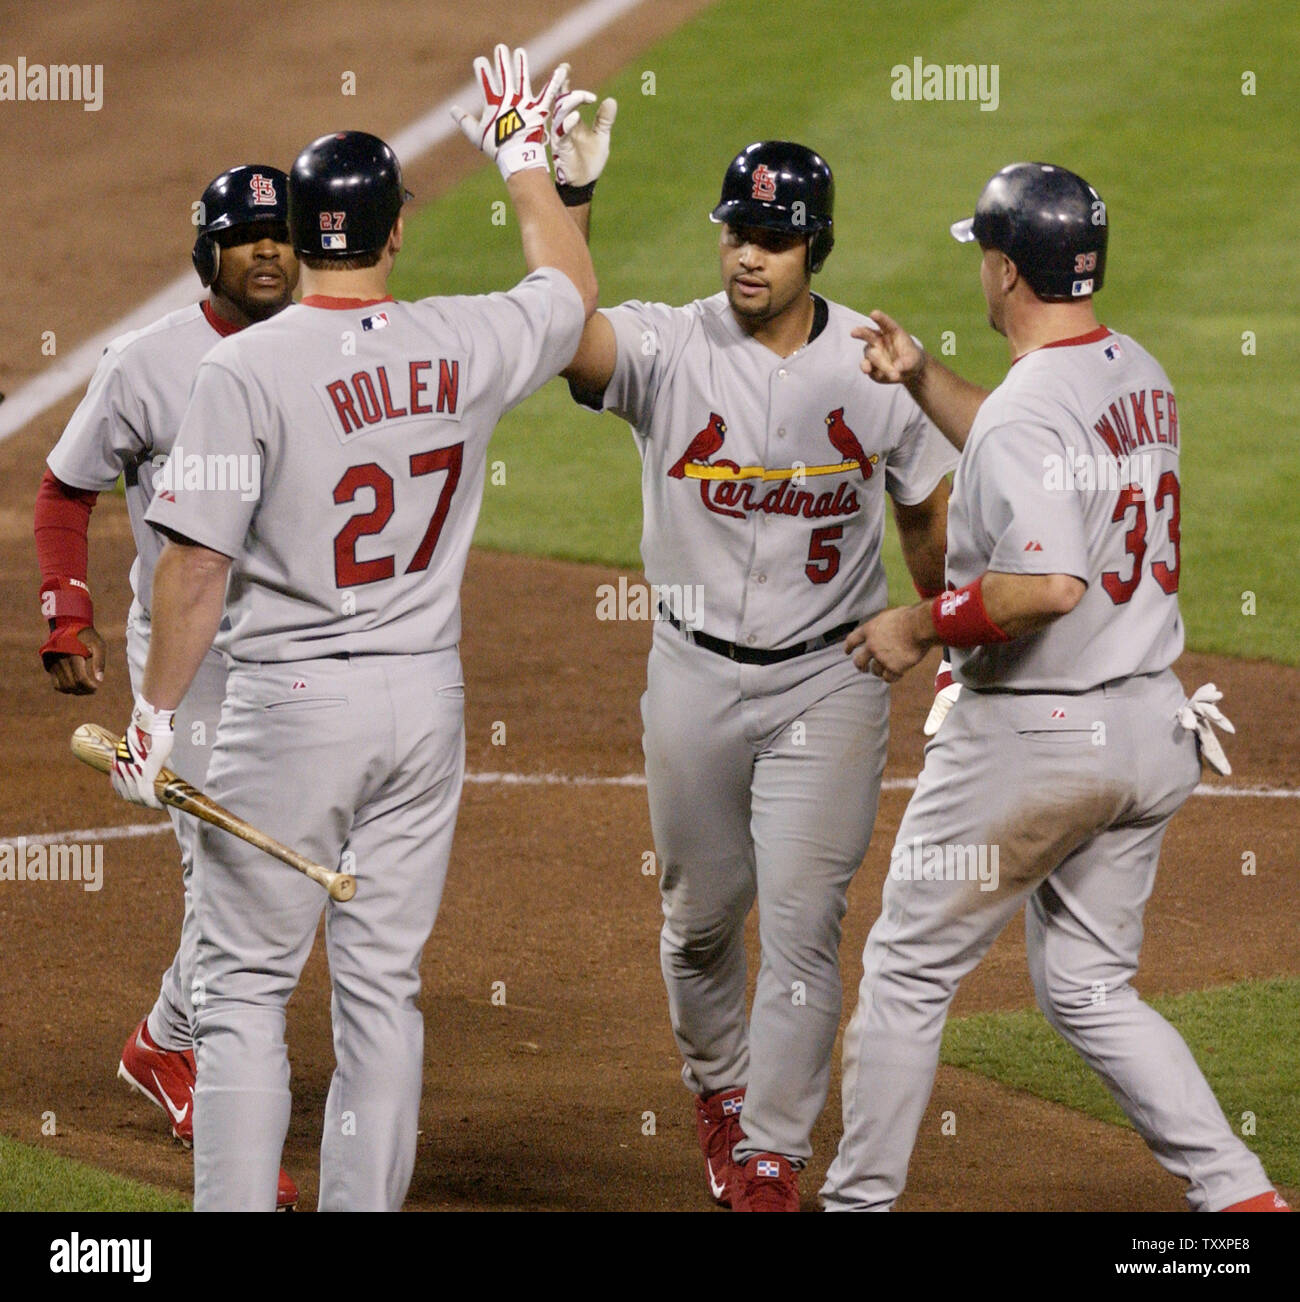 St. Louis Cardinals' Albert Pujols (5) is welcomed home by teammates Scott  Rolen (27) and Larry Walker (33) after belting a three run homer in the  fourth inning against the Dodgers in